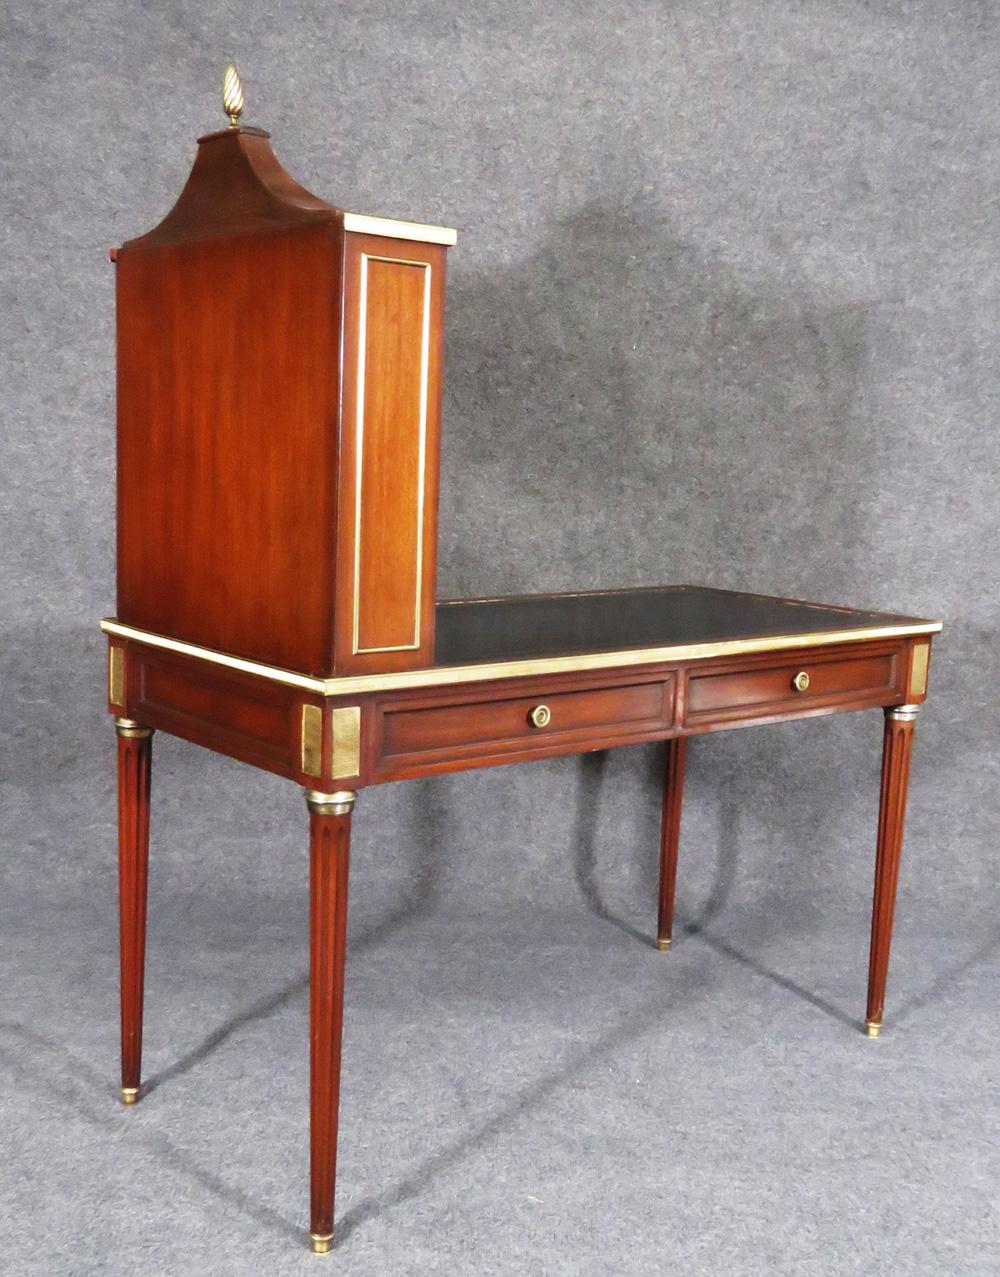 Rare Signed Maison Jansen Leather Top Brass Mounted Cartonnier Writing Desk In Good Condition In Swedesboro, NJ